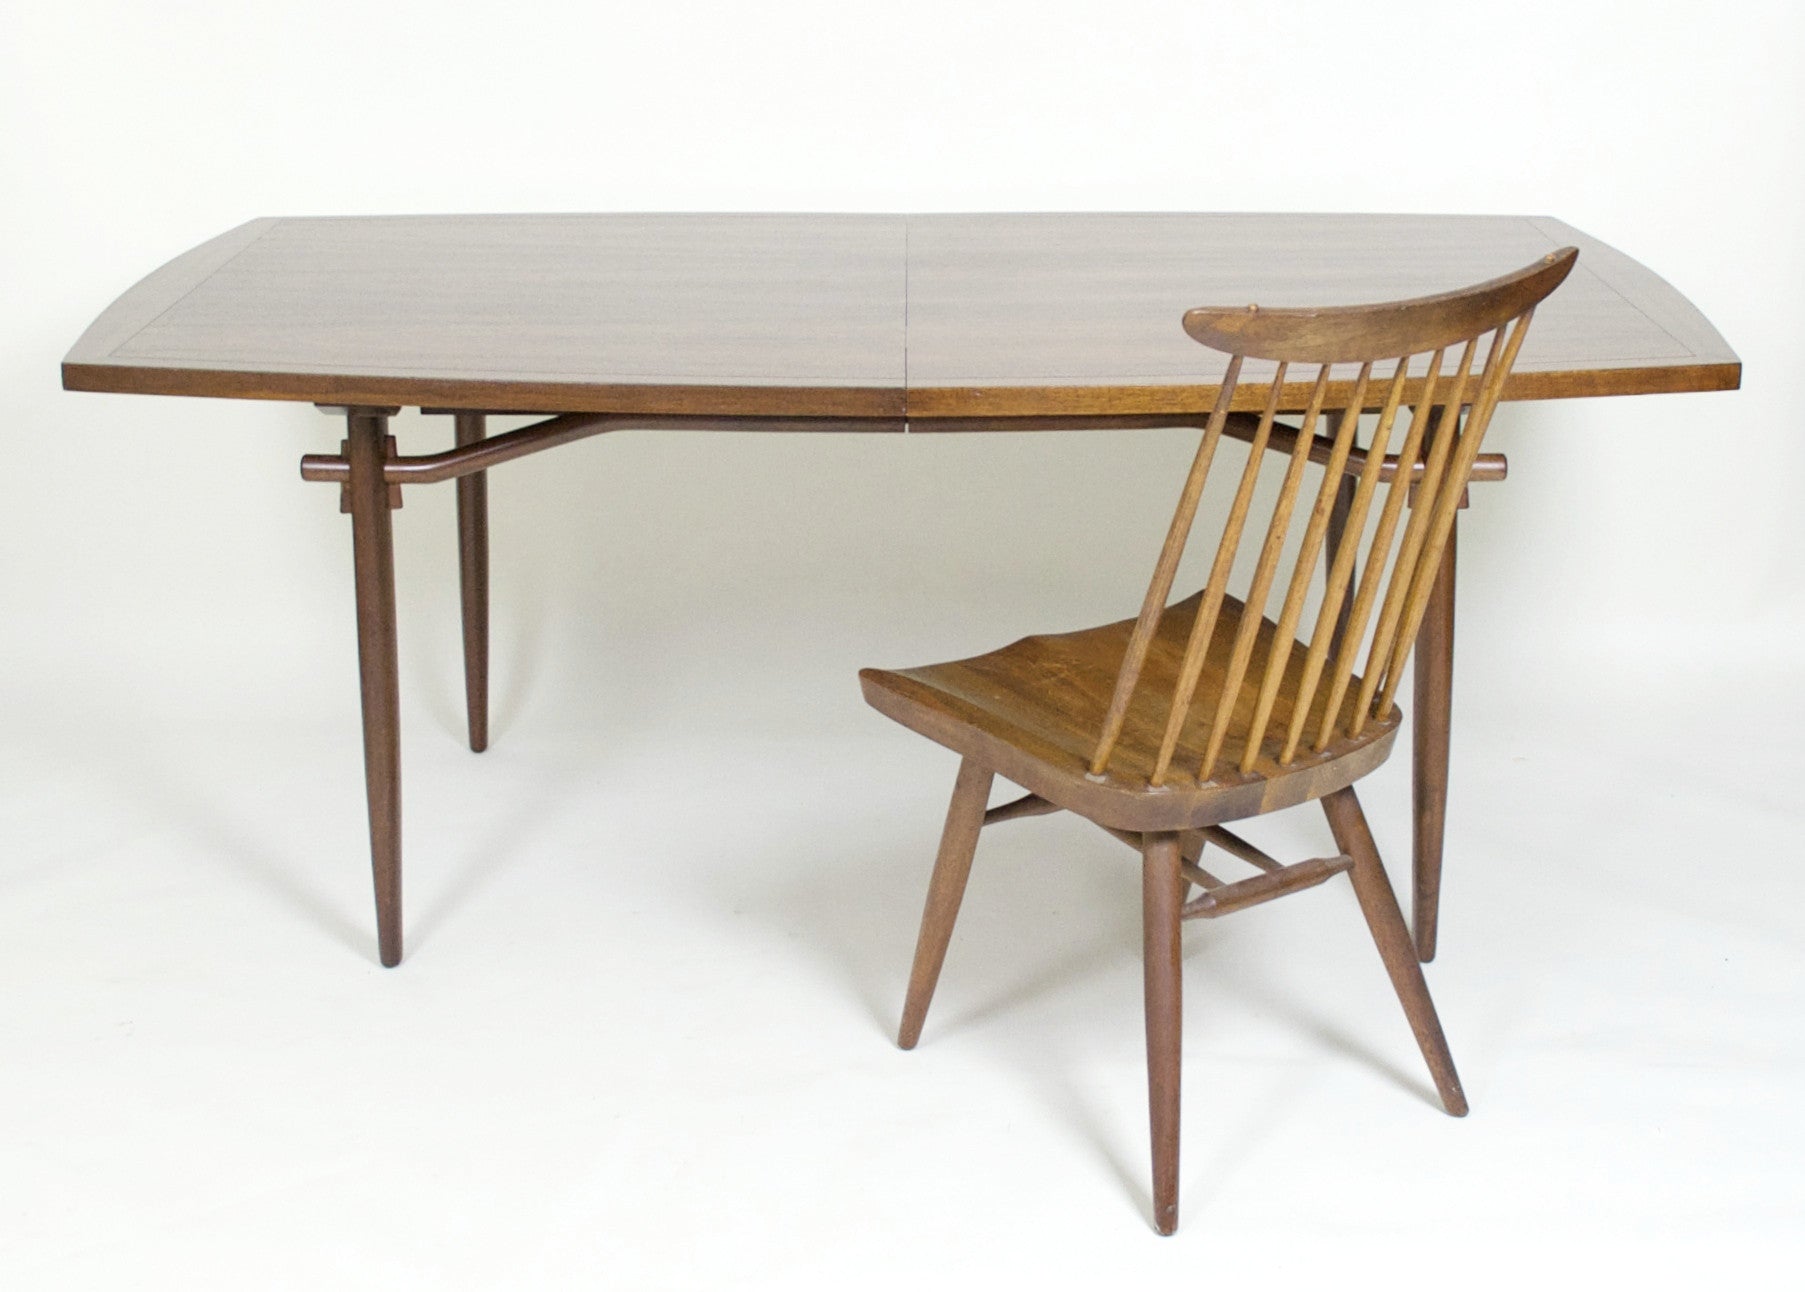 SOLD George Nakashima for Widdicomb Sundra Dining Table With Leaf